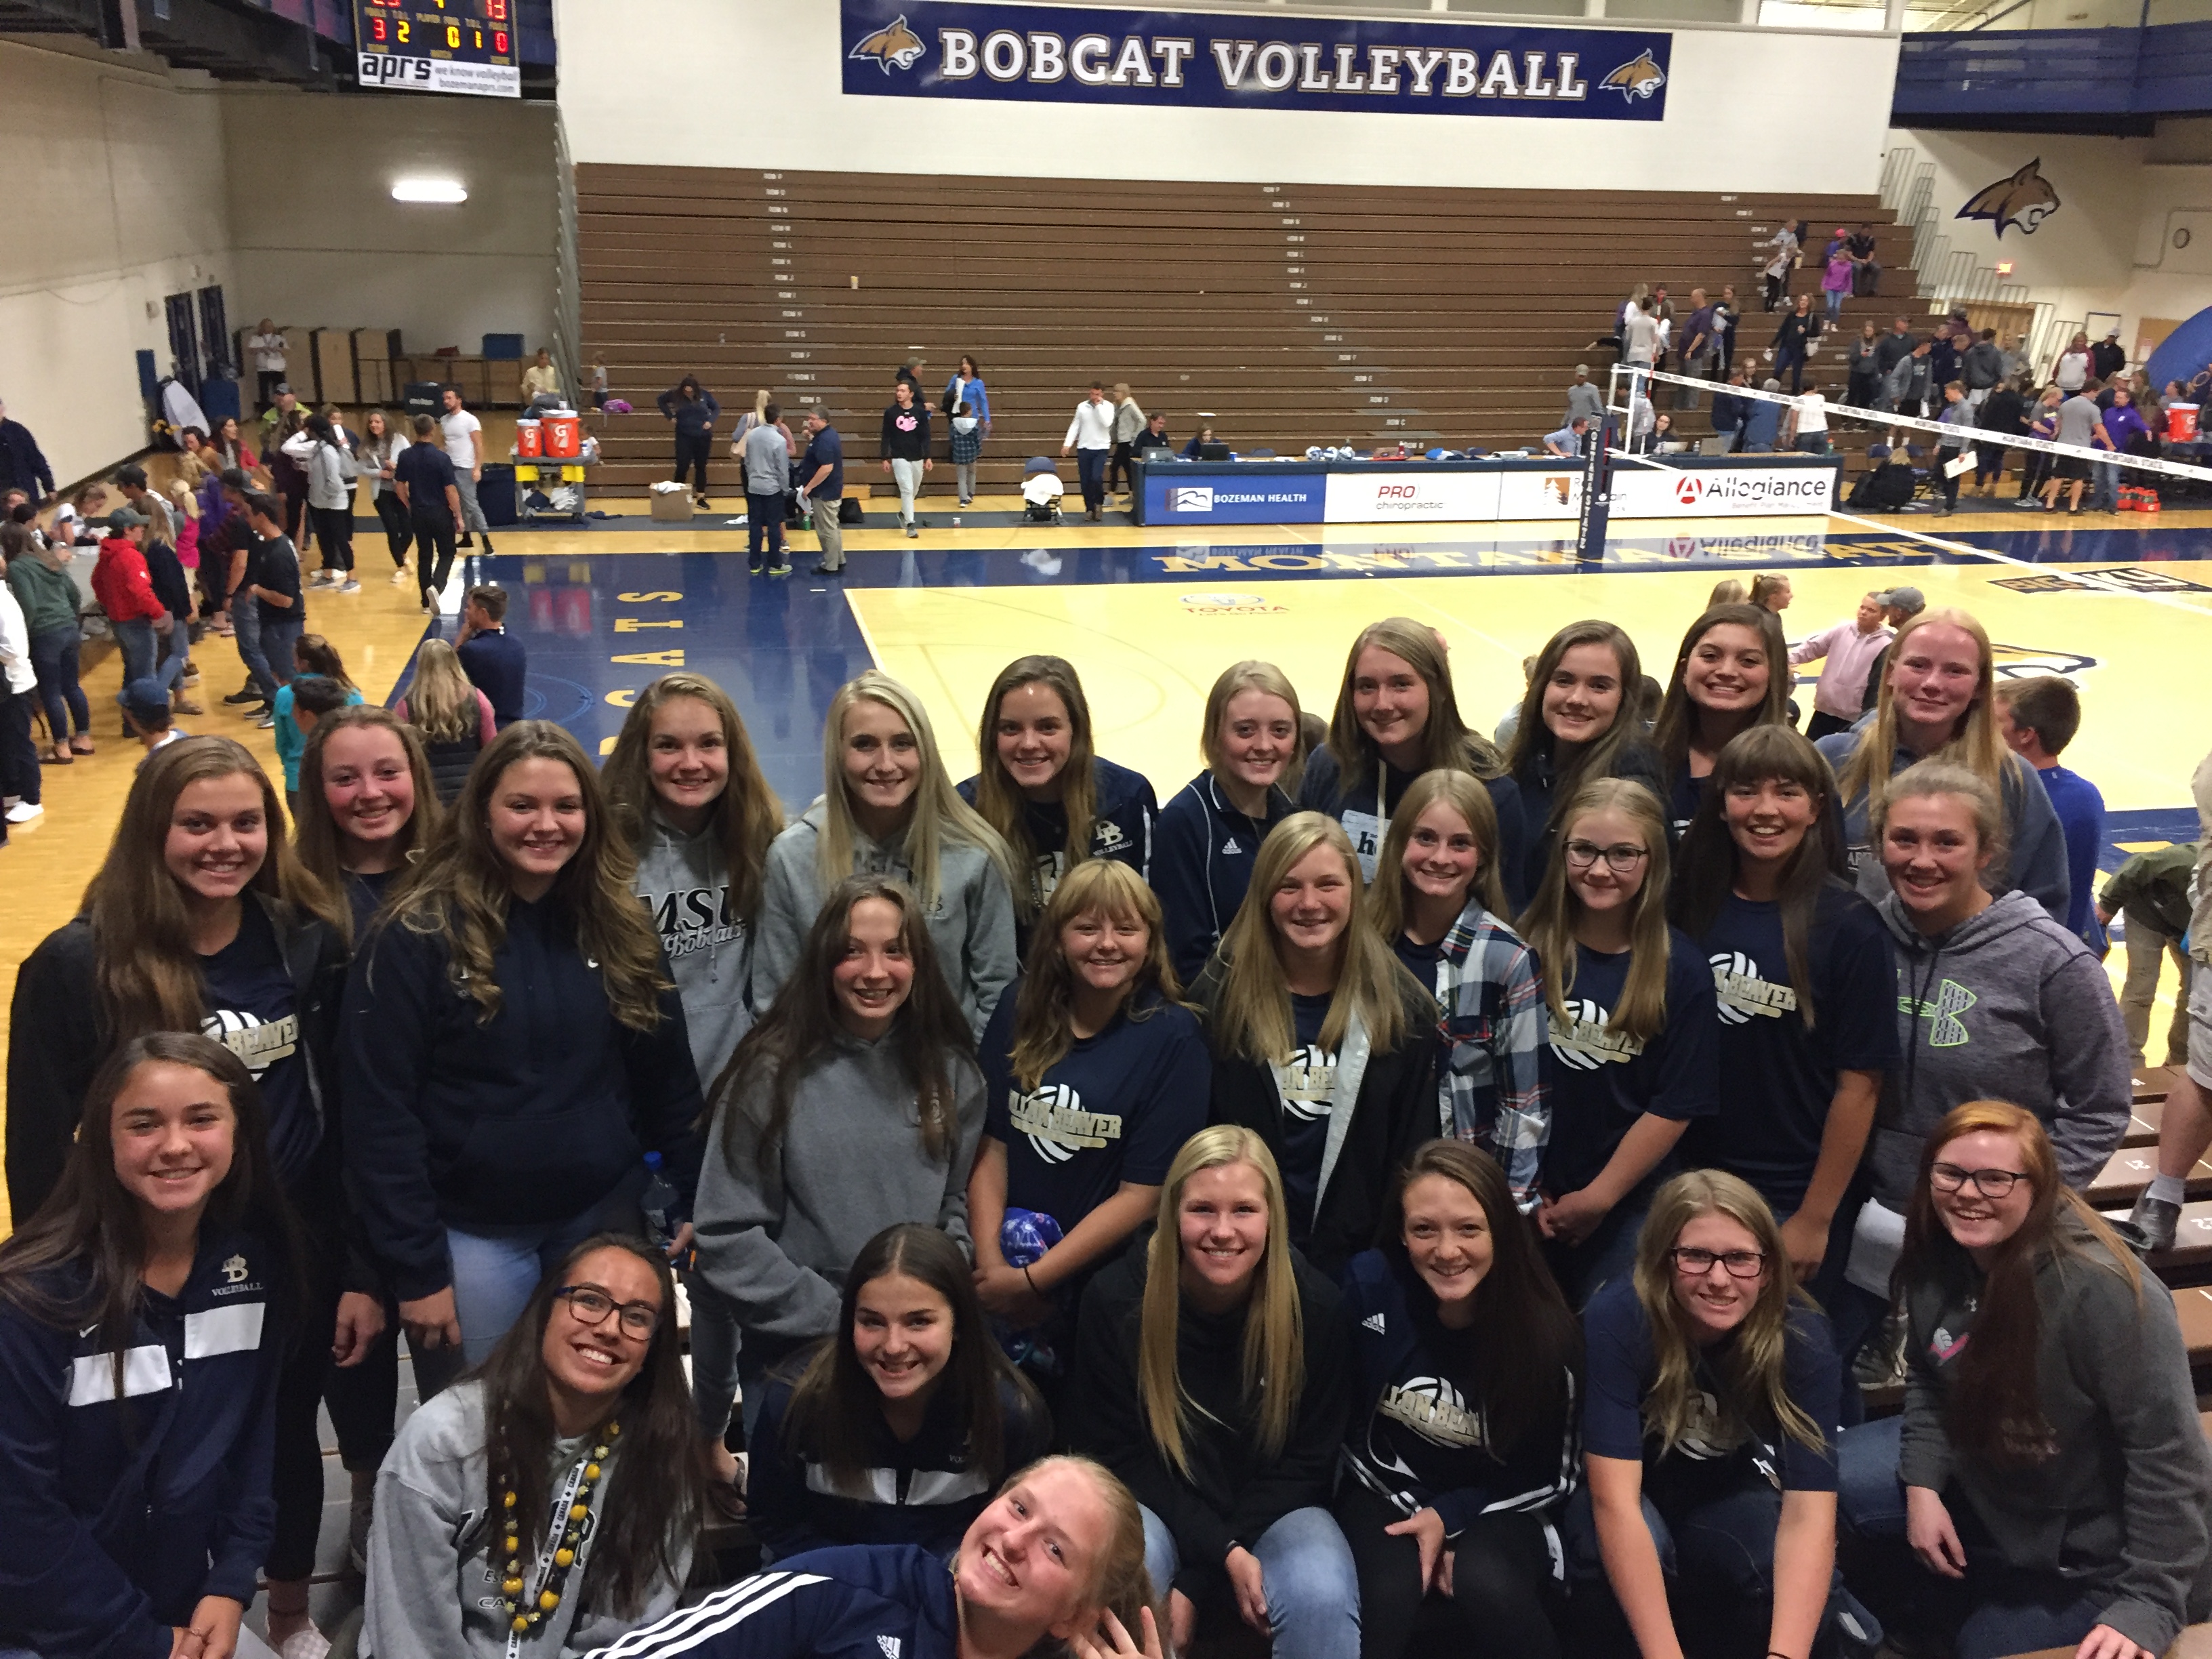 A photo of the volleyball team on a trip to watch the MSU Bobcats in August 2018